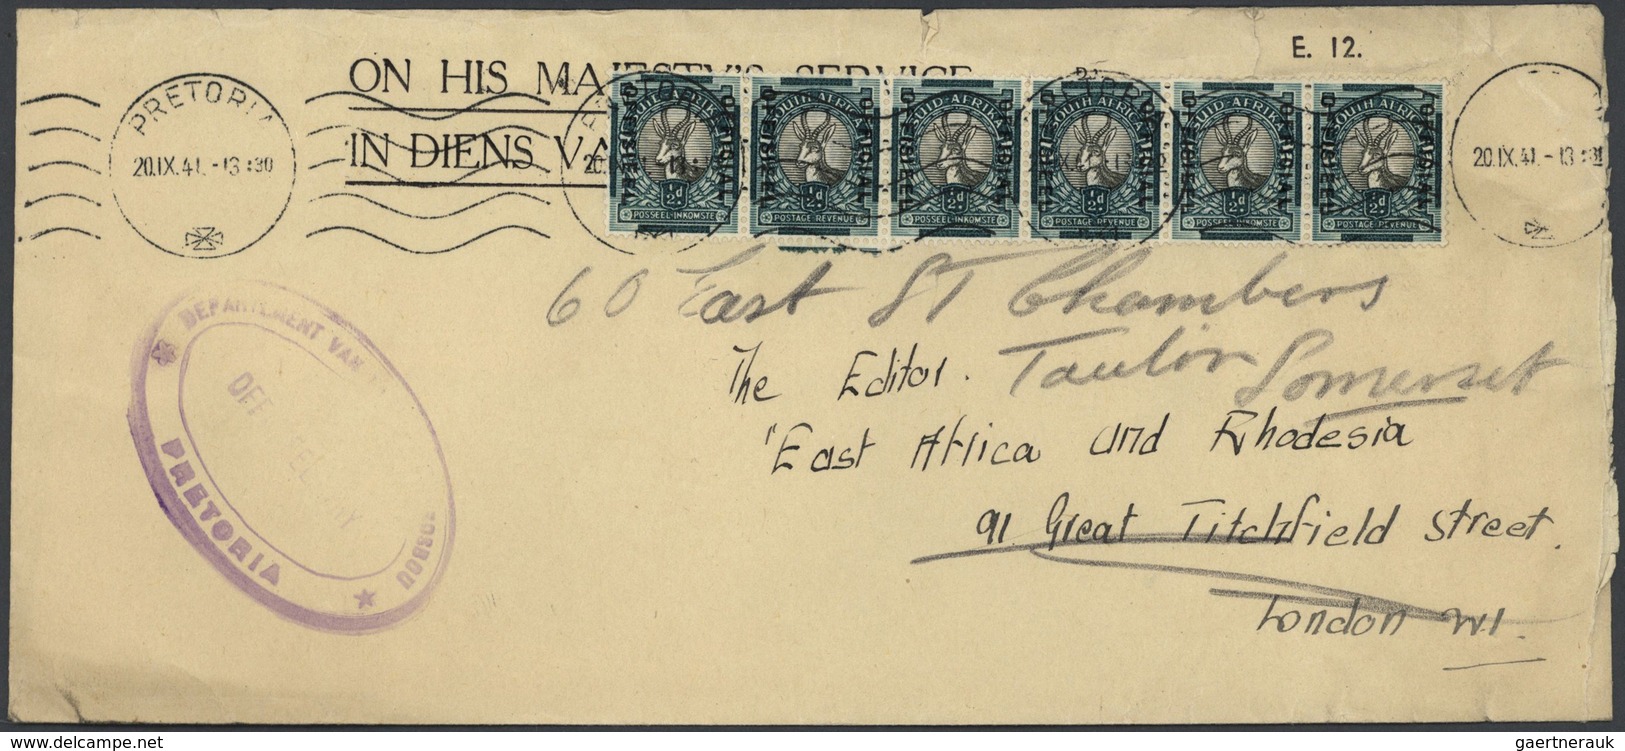 Südafrika - Dienstmarken: 1941/47, Covers (7 Inc. 4 By Air Mail) All Used To The Editor, "East Afric - Dienstmarken